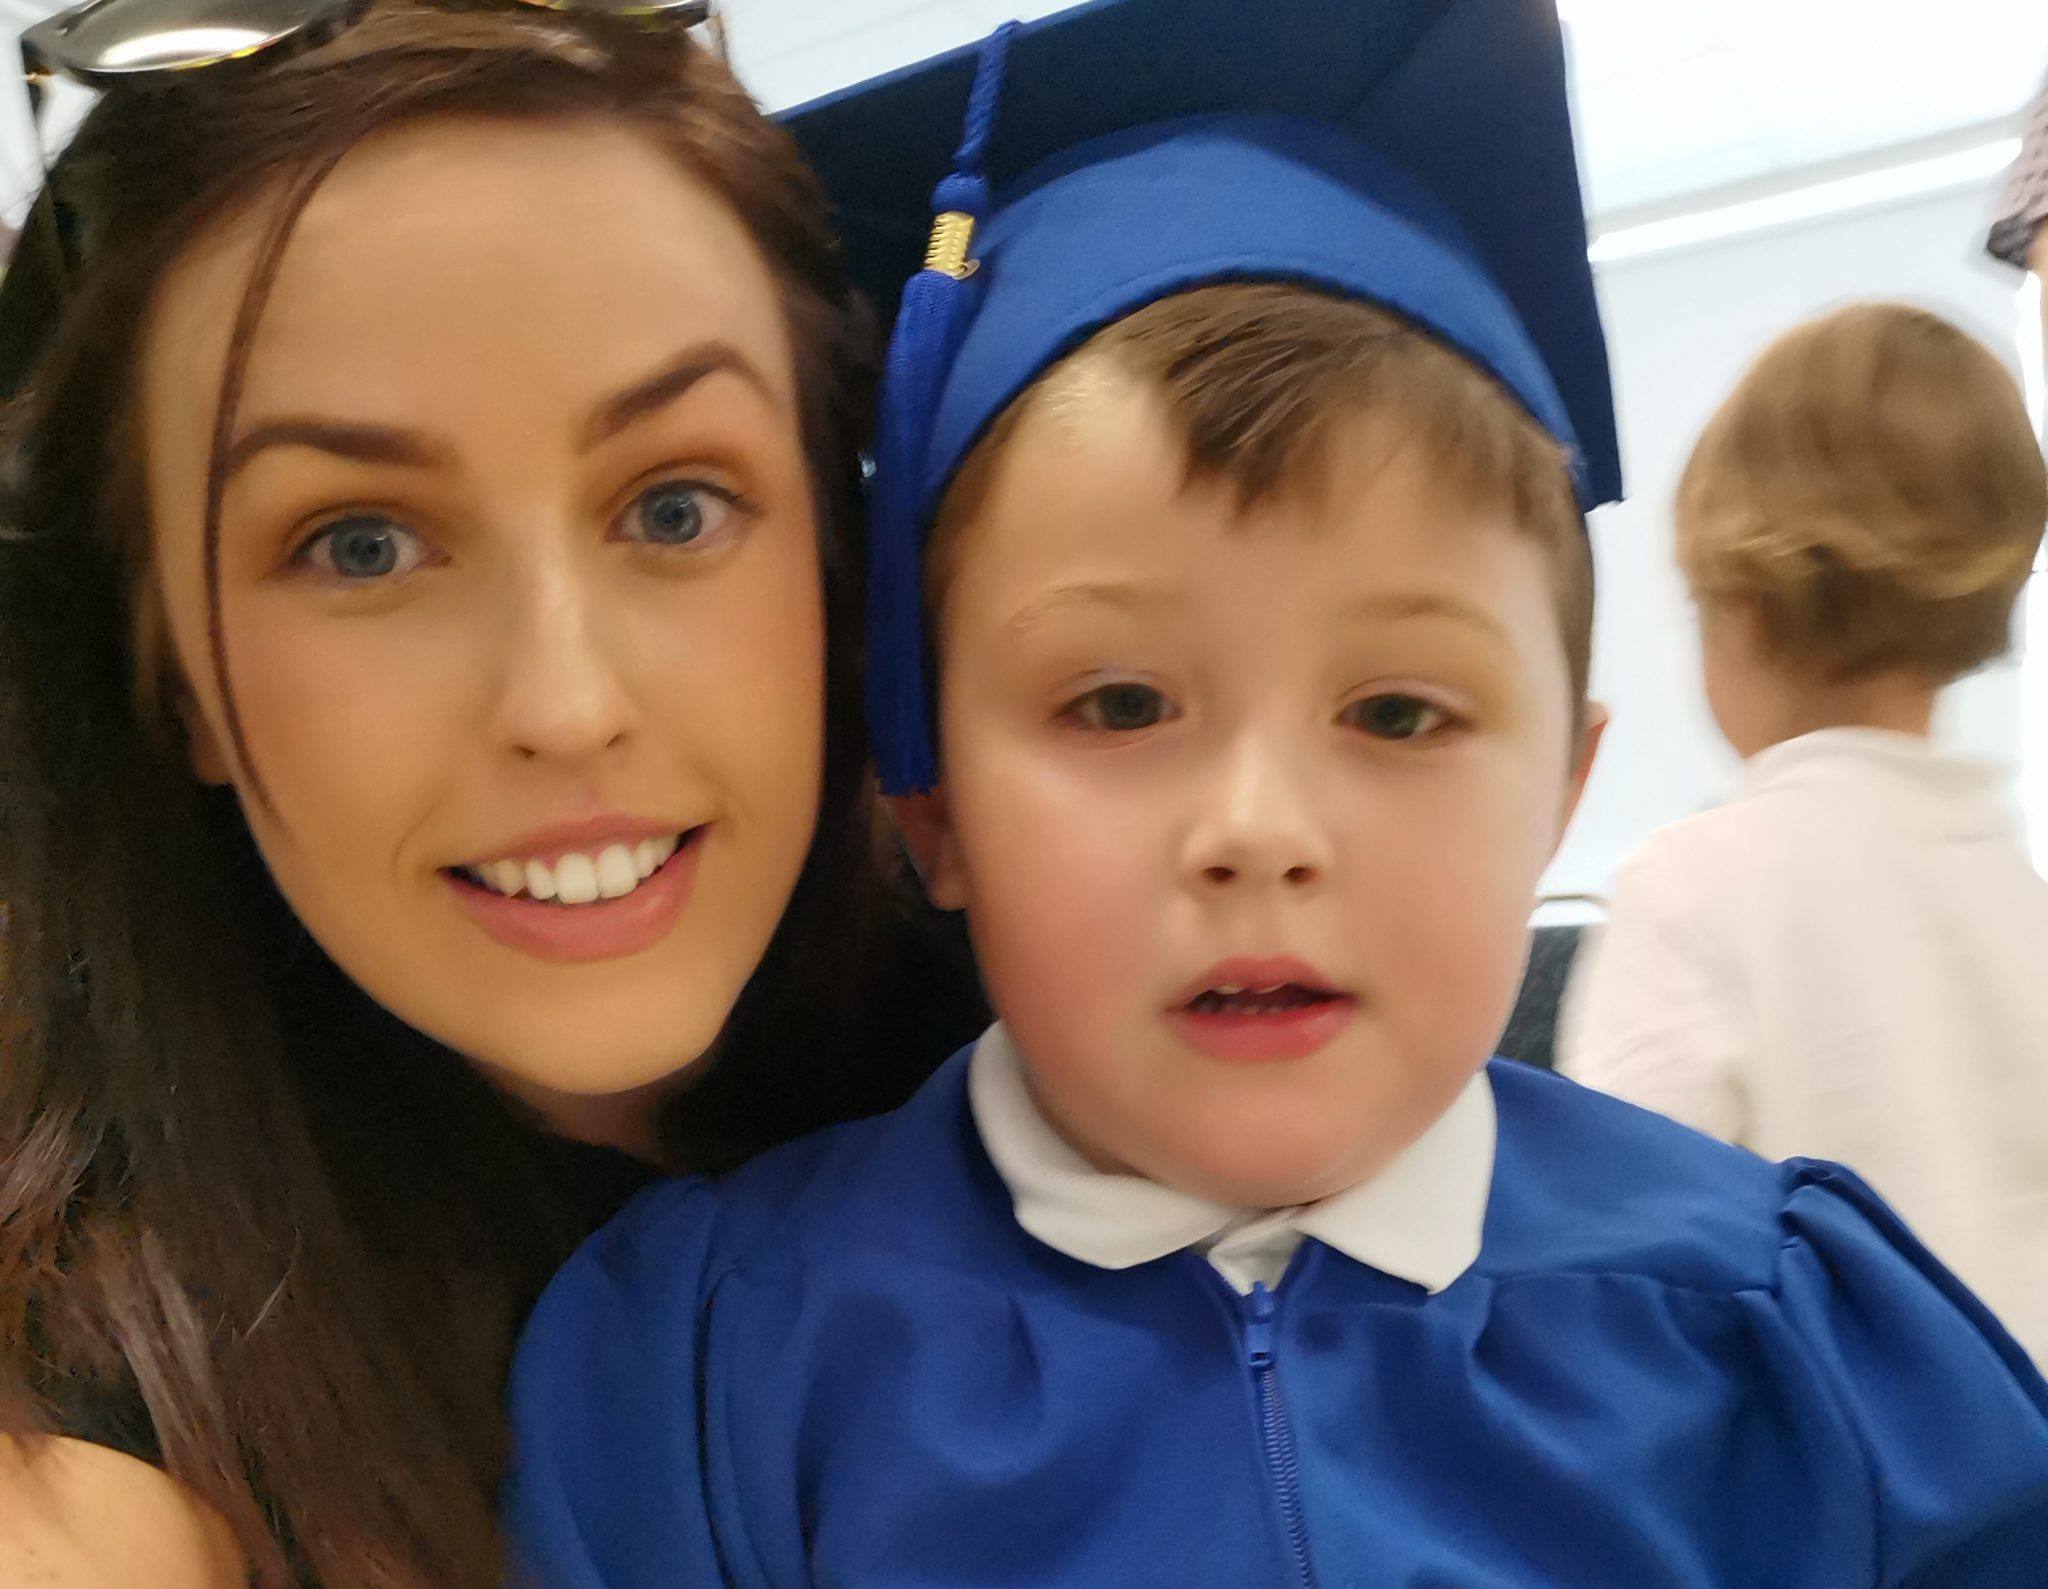 “Different does not mean bad” – watch these Cork mums talk about having a child with special needs